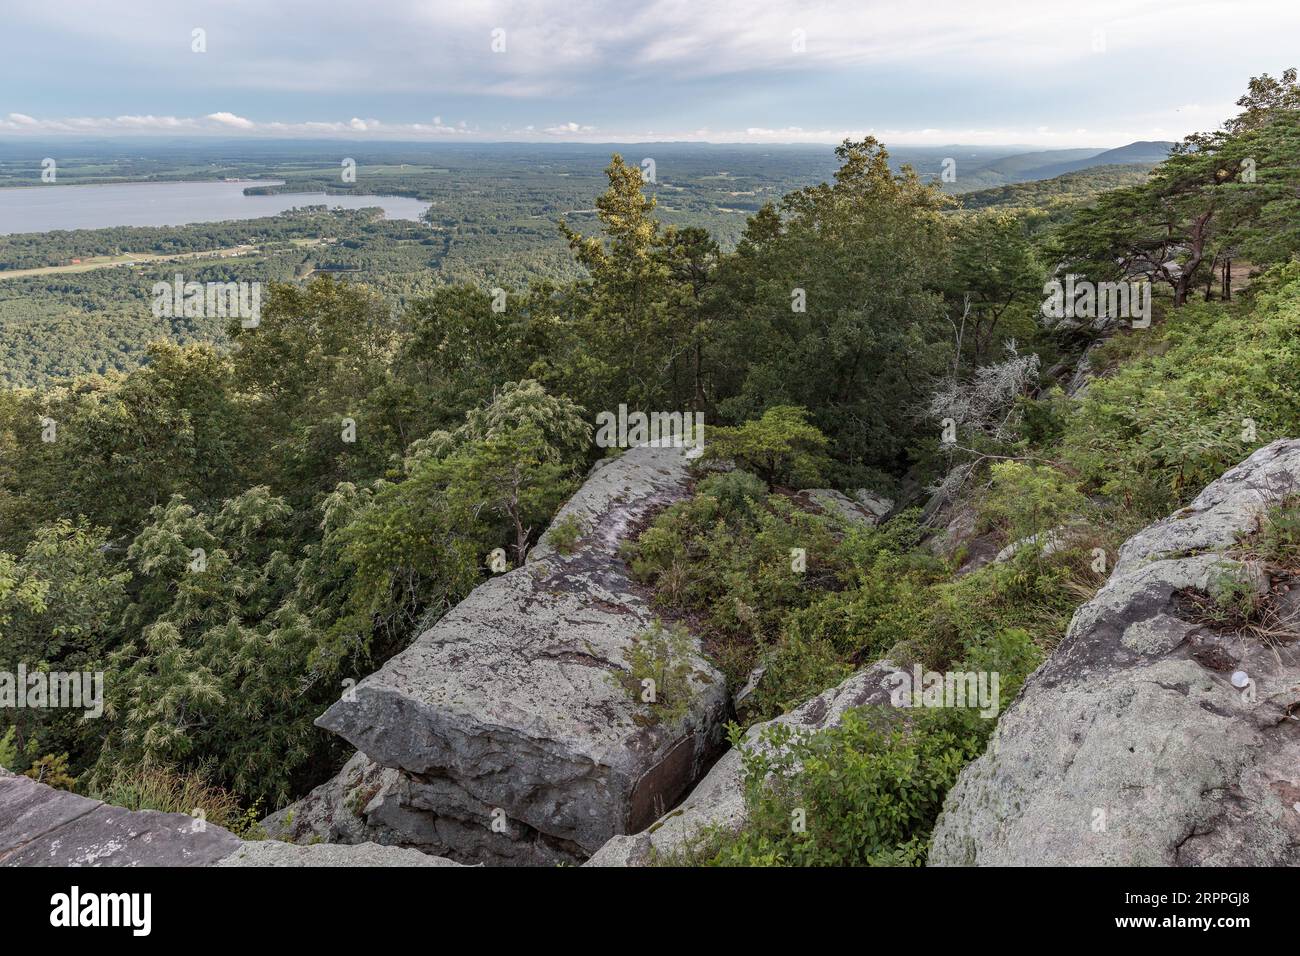 View of Weiss Lake from Cheyenne Rock Village park near Leesburg, Alabama Stock Photo